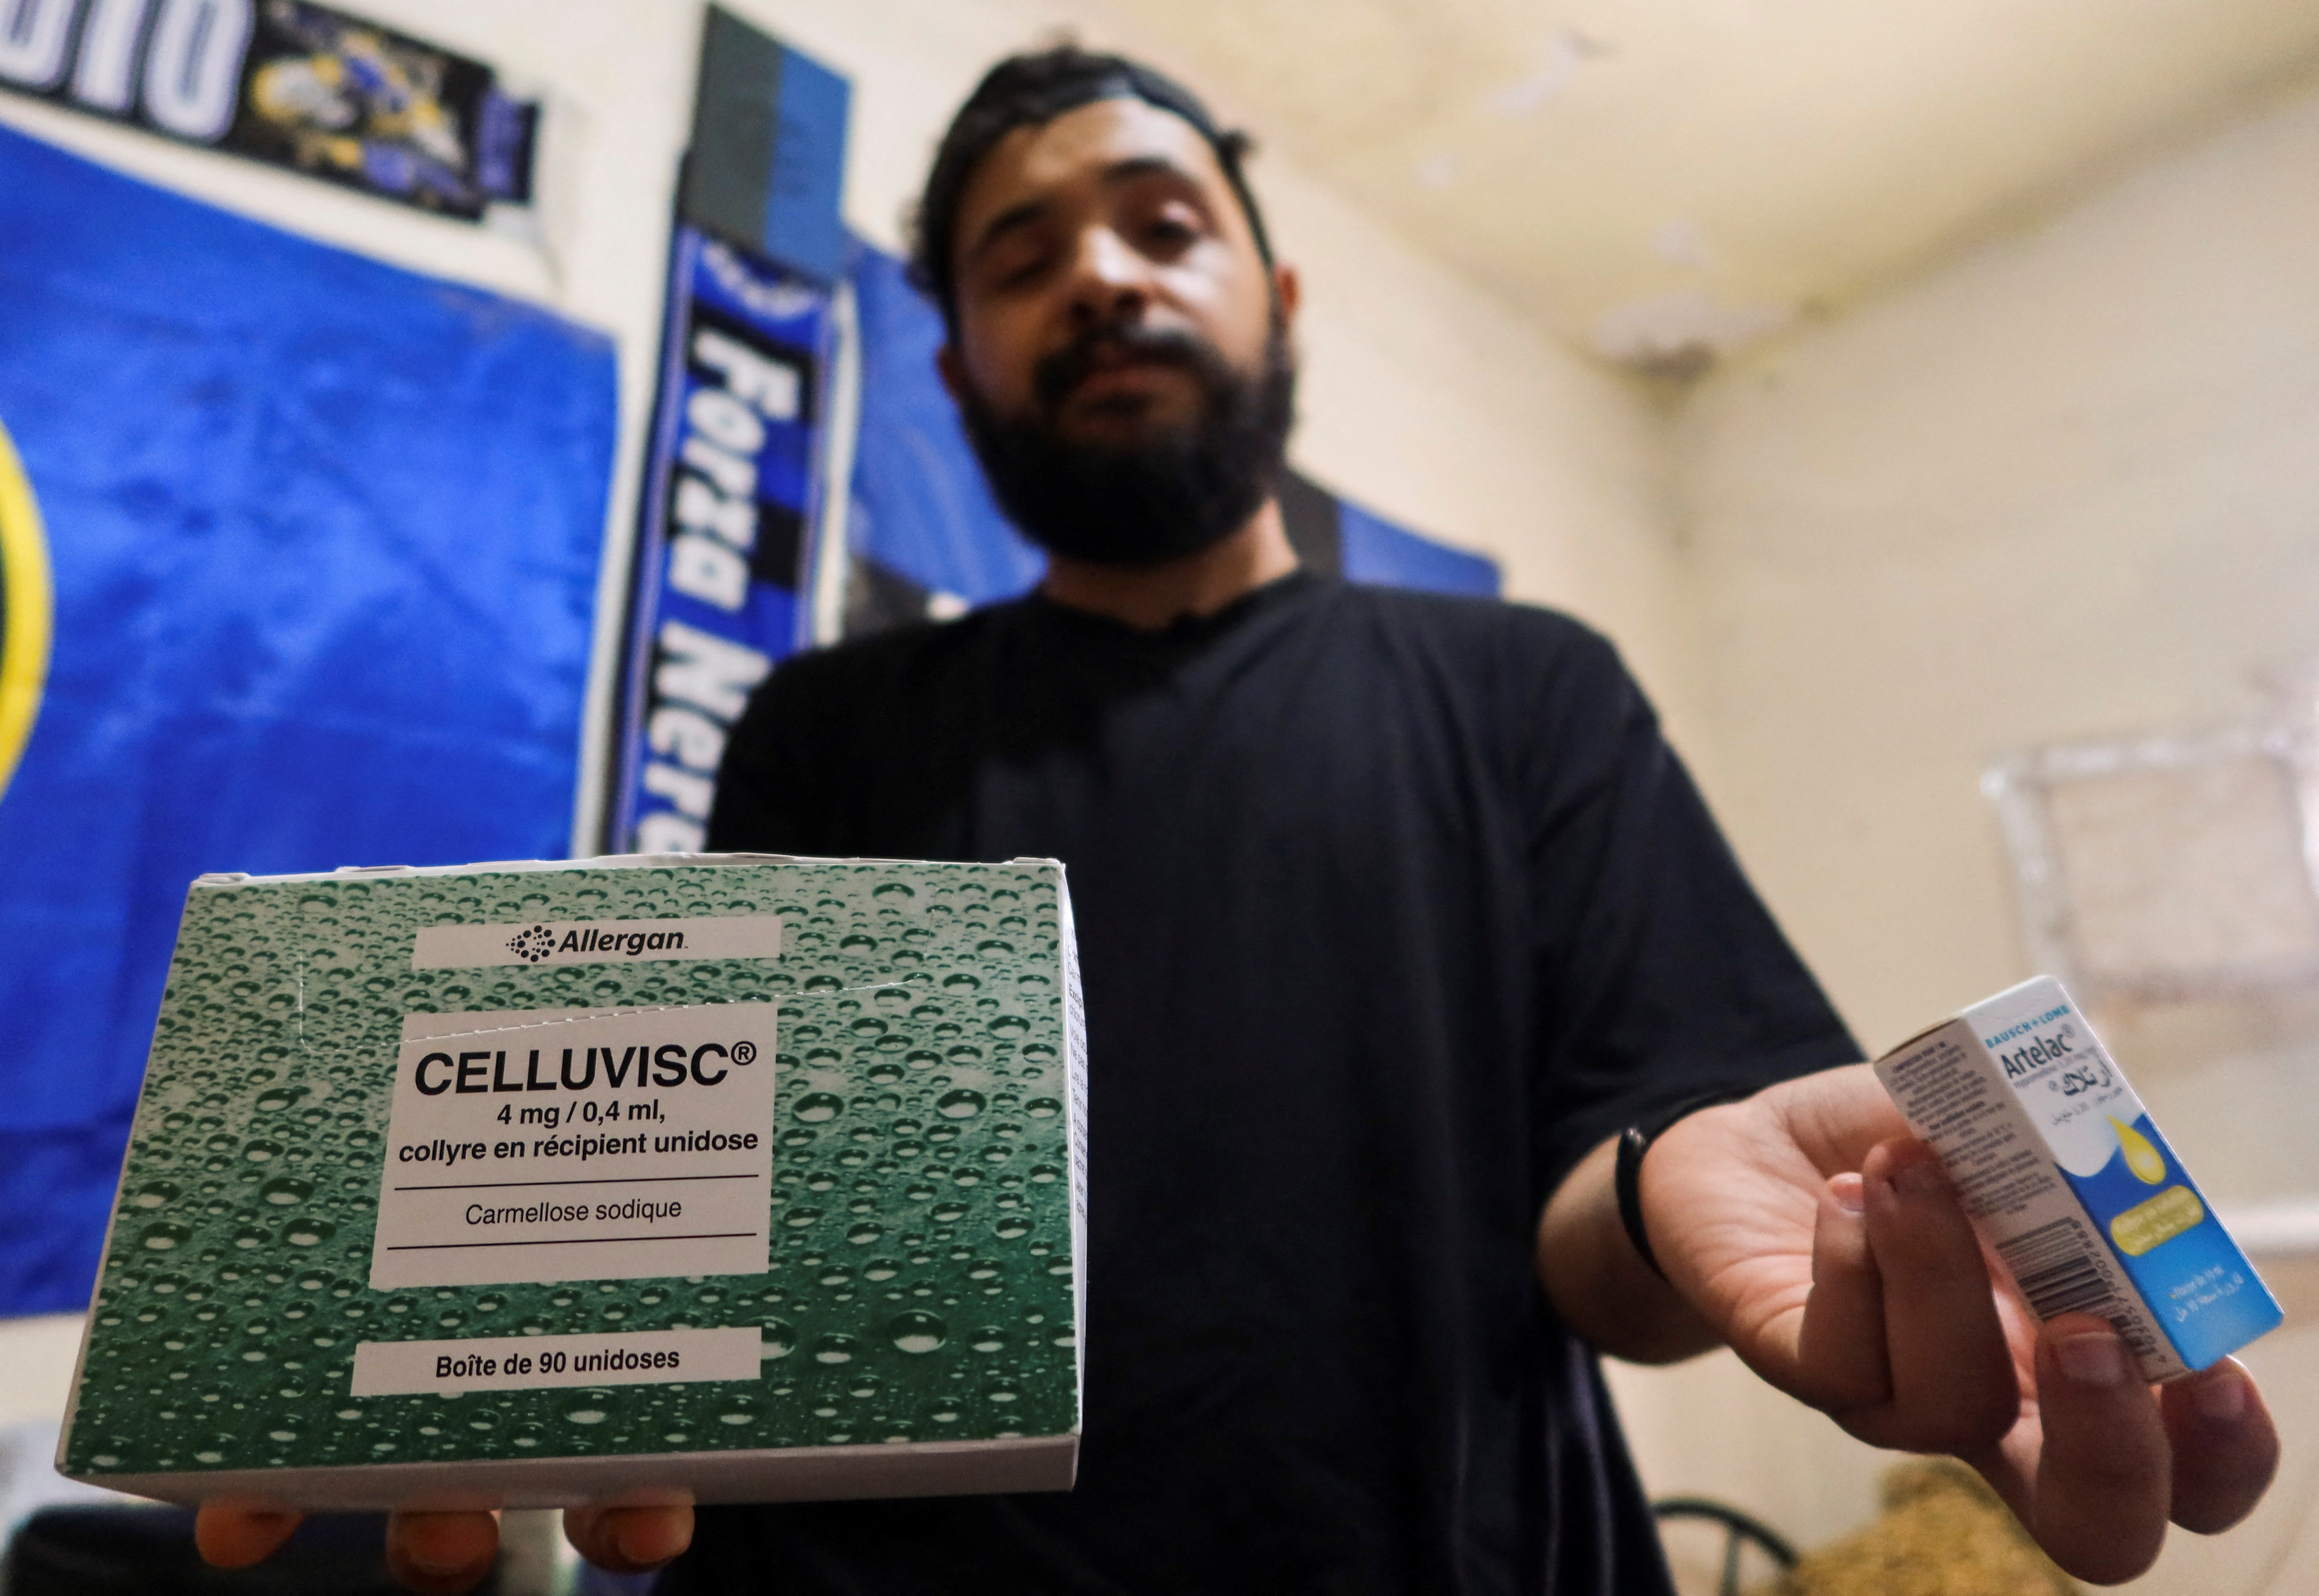 Abdessalem Maraouni, a Tunisian university student displays a medicine box of "Celluvisc" at his home in Tunis